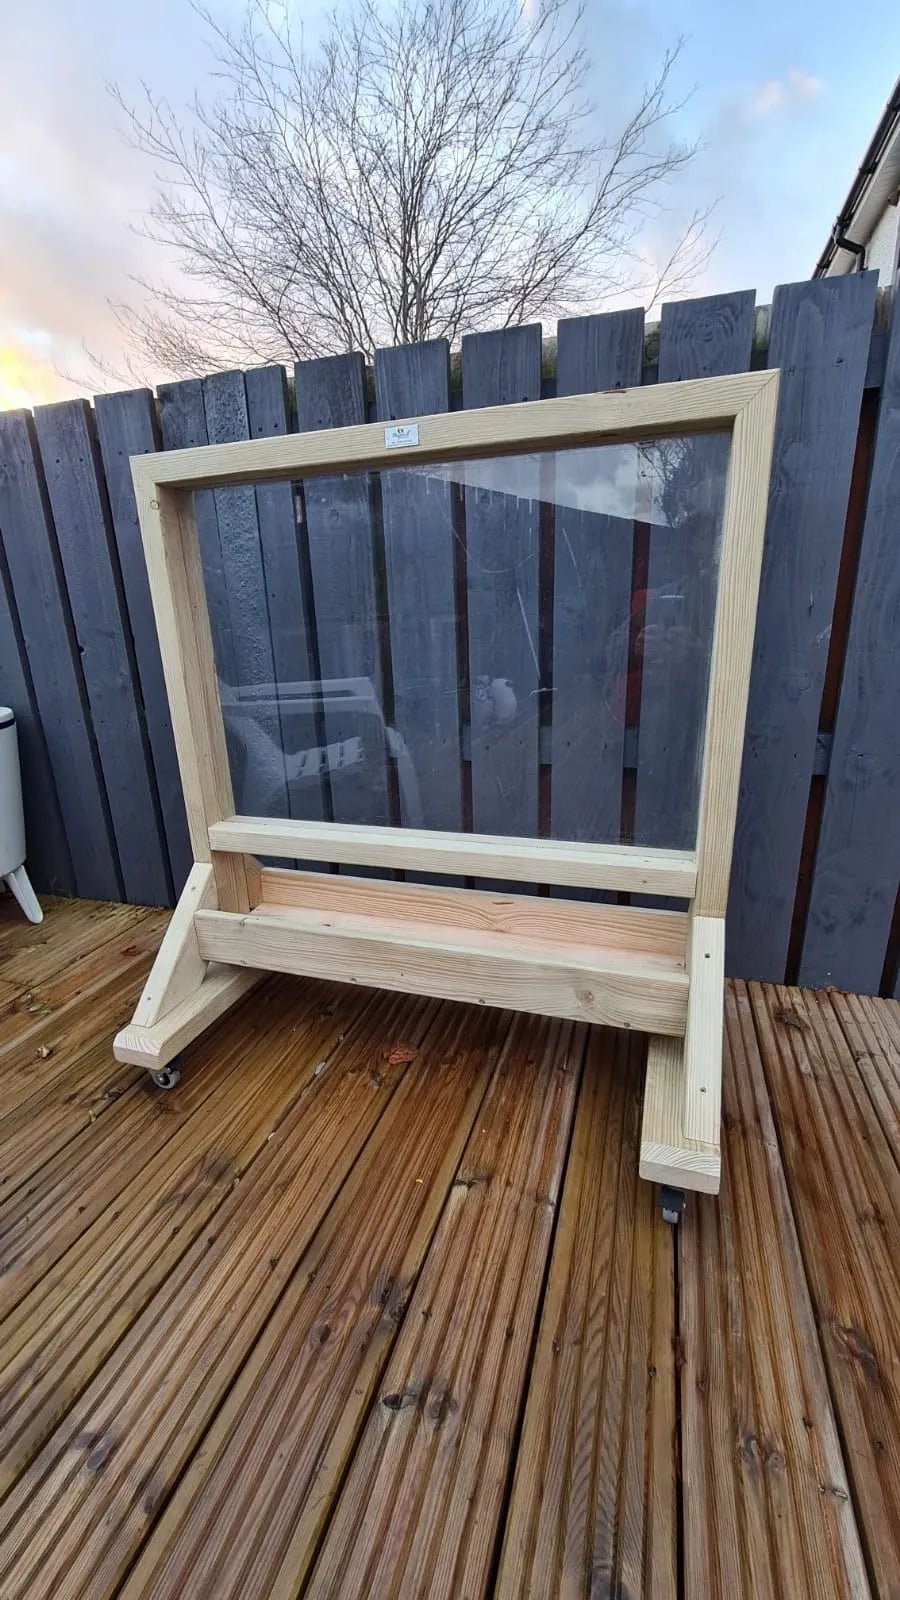 Easel Outdoor Equipment | Learning and Exploring Through Play